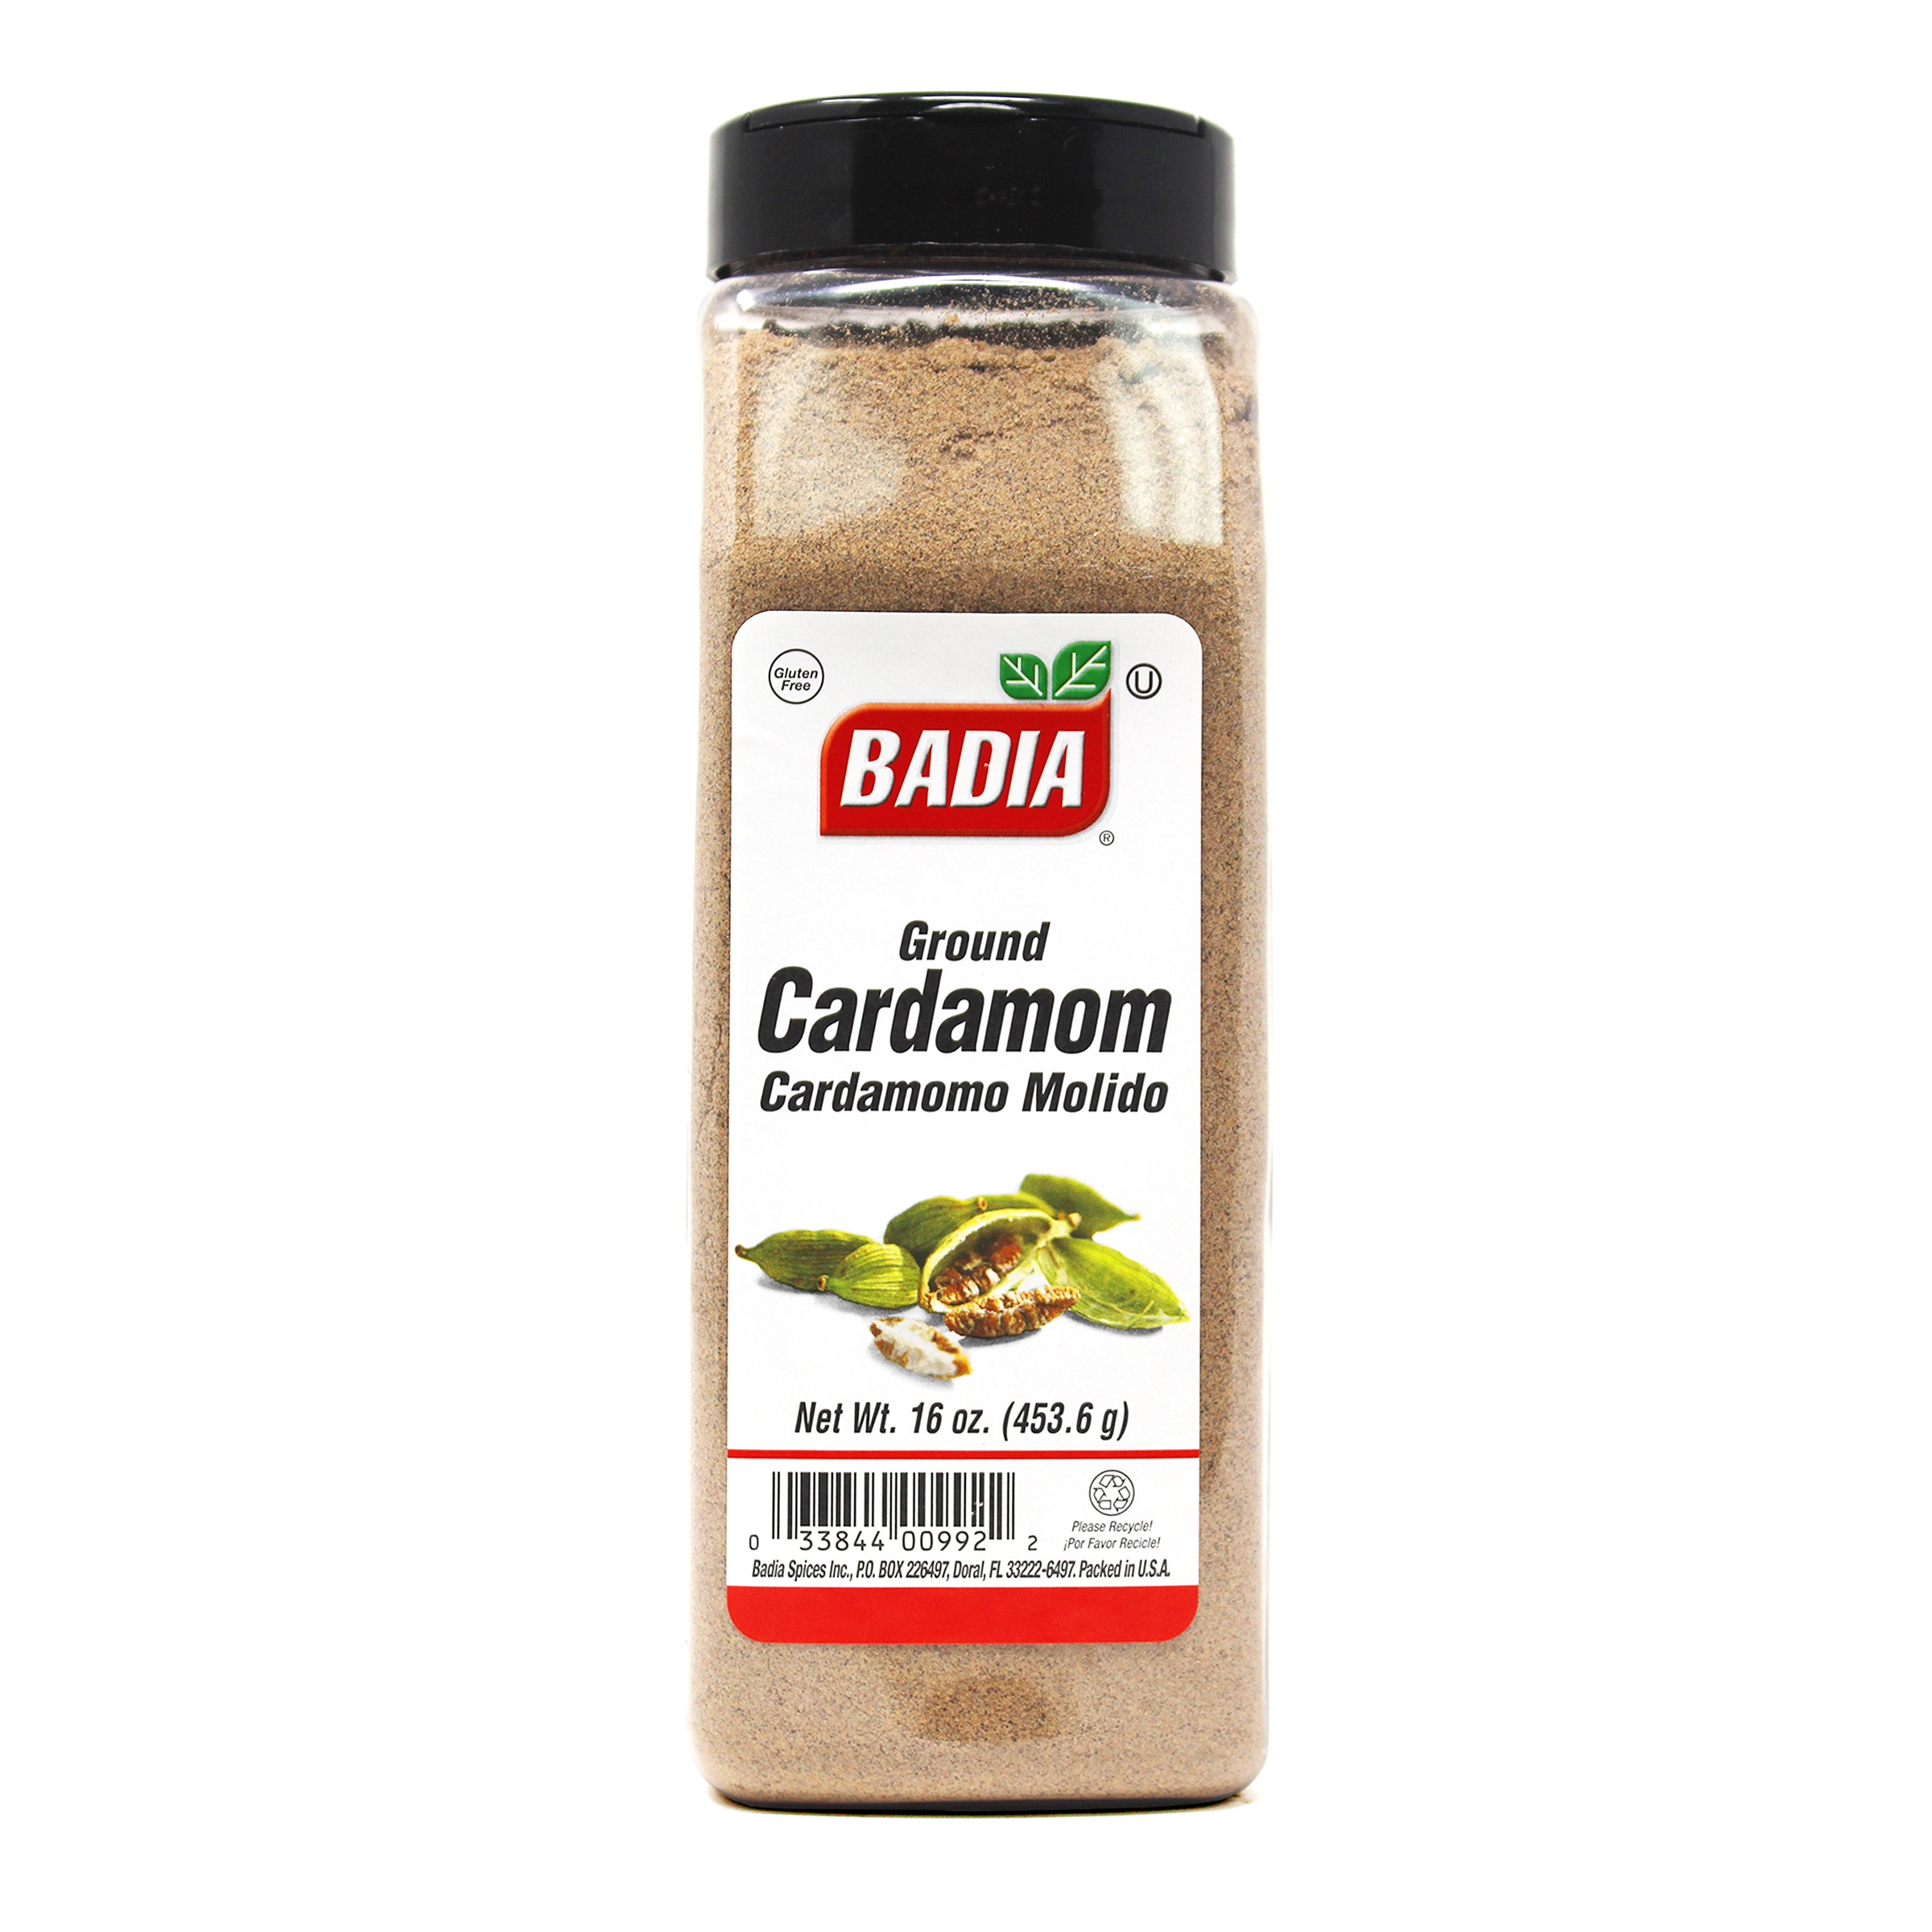 Cardamom Ground 16 Oz Badia Spices,Diy Projects For Men